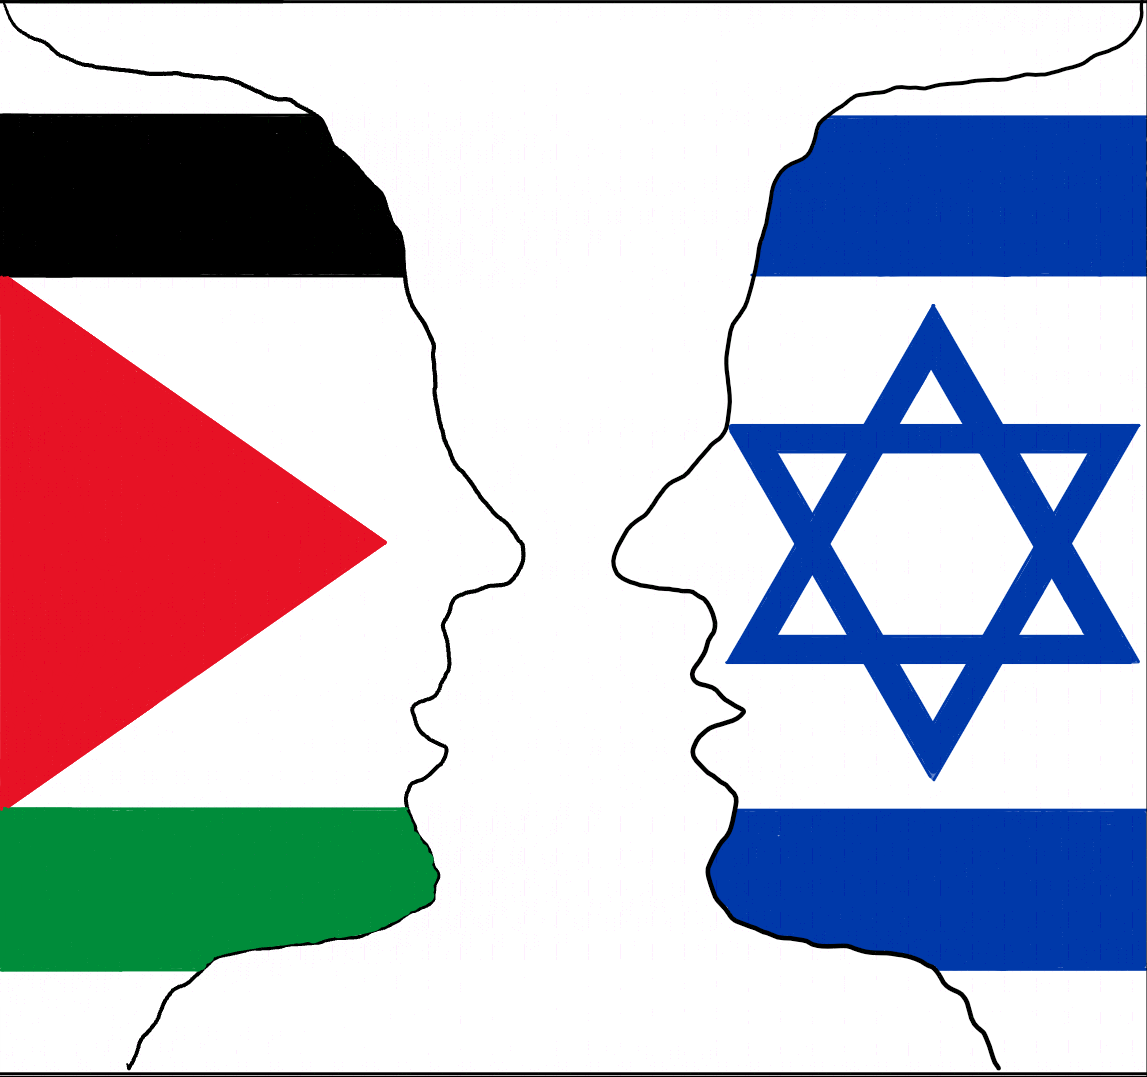 We need to respond to the Israel-Palestine conflict